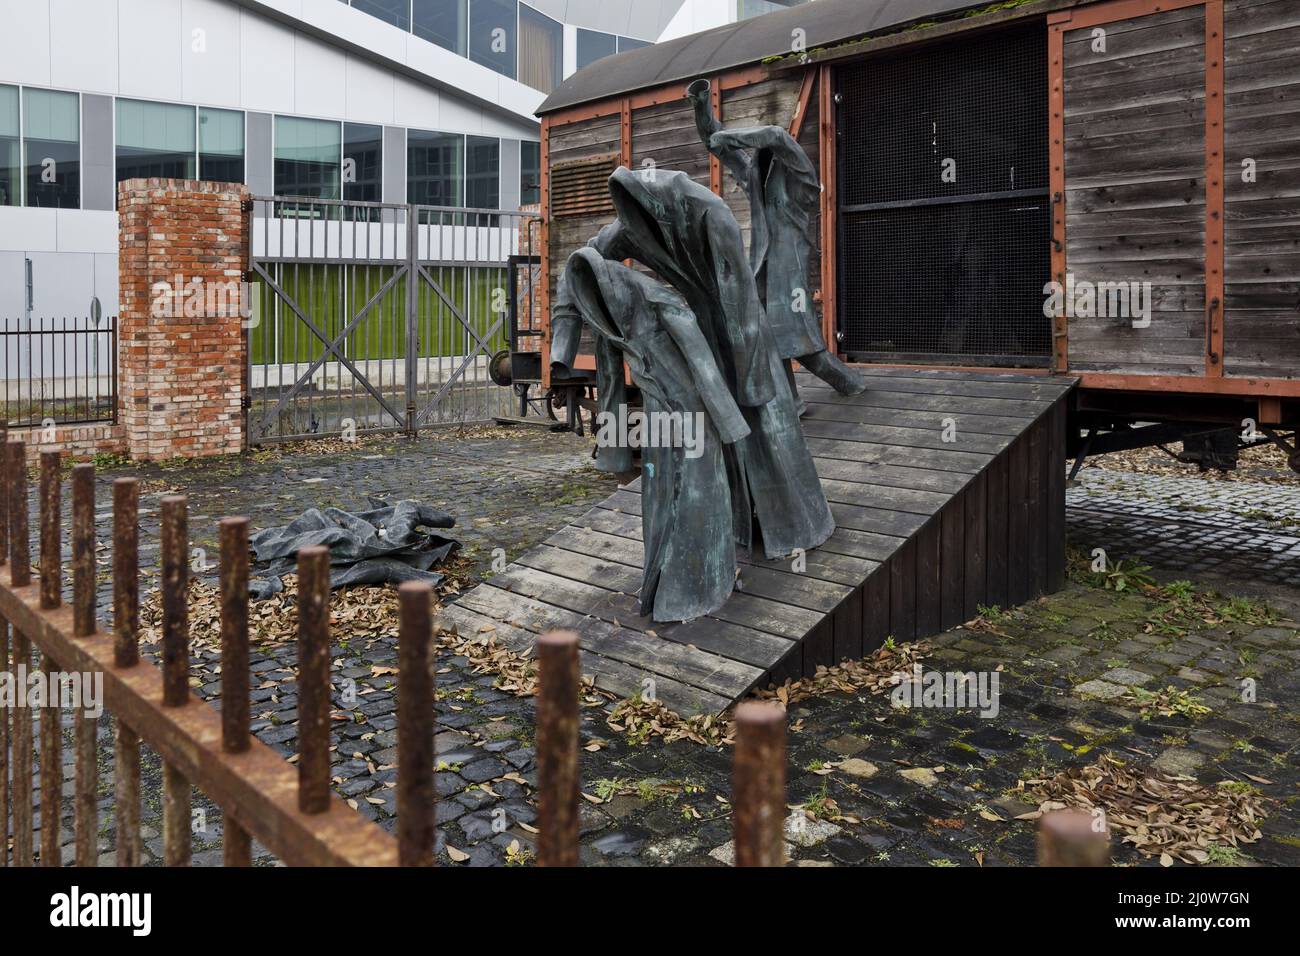 Memorial Die Rampe, artist E.R. Nele, memory of deportation and forced laborers, Kassel, Germany Stock Photo